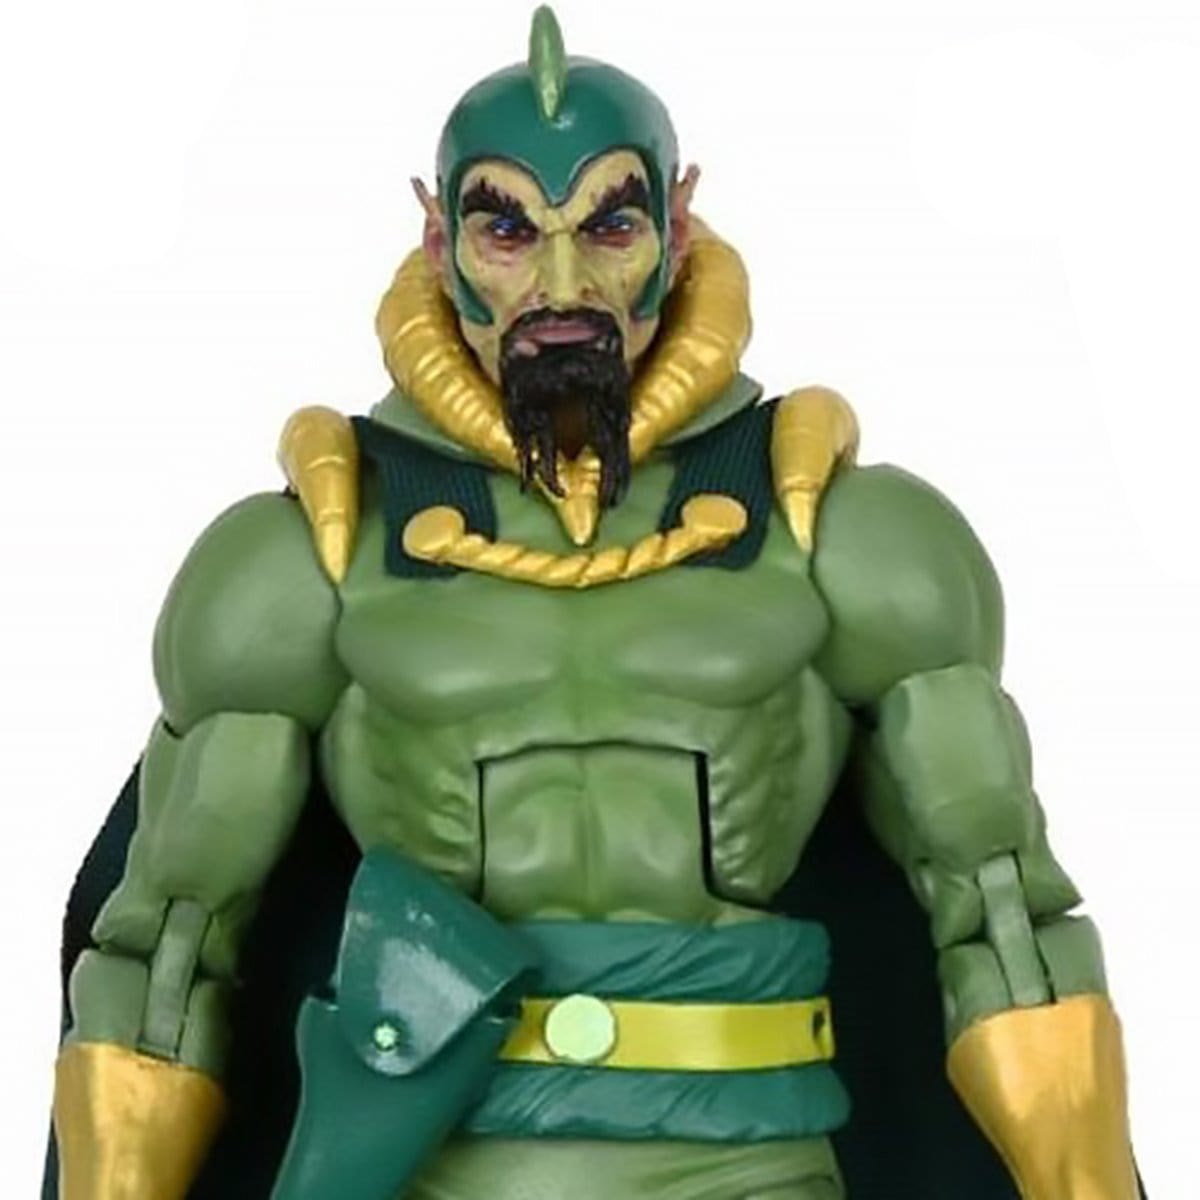 NECA King Features The Original Superheroes Ming the Merciless Action Figure